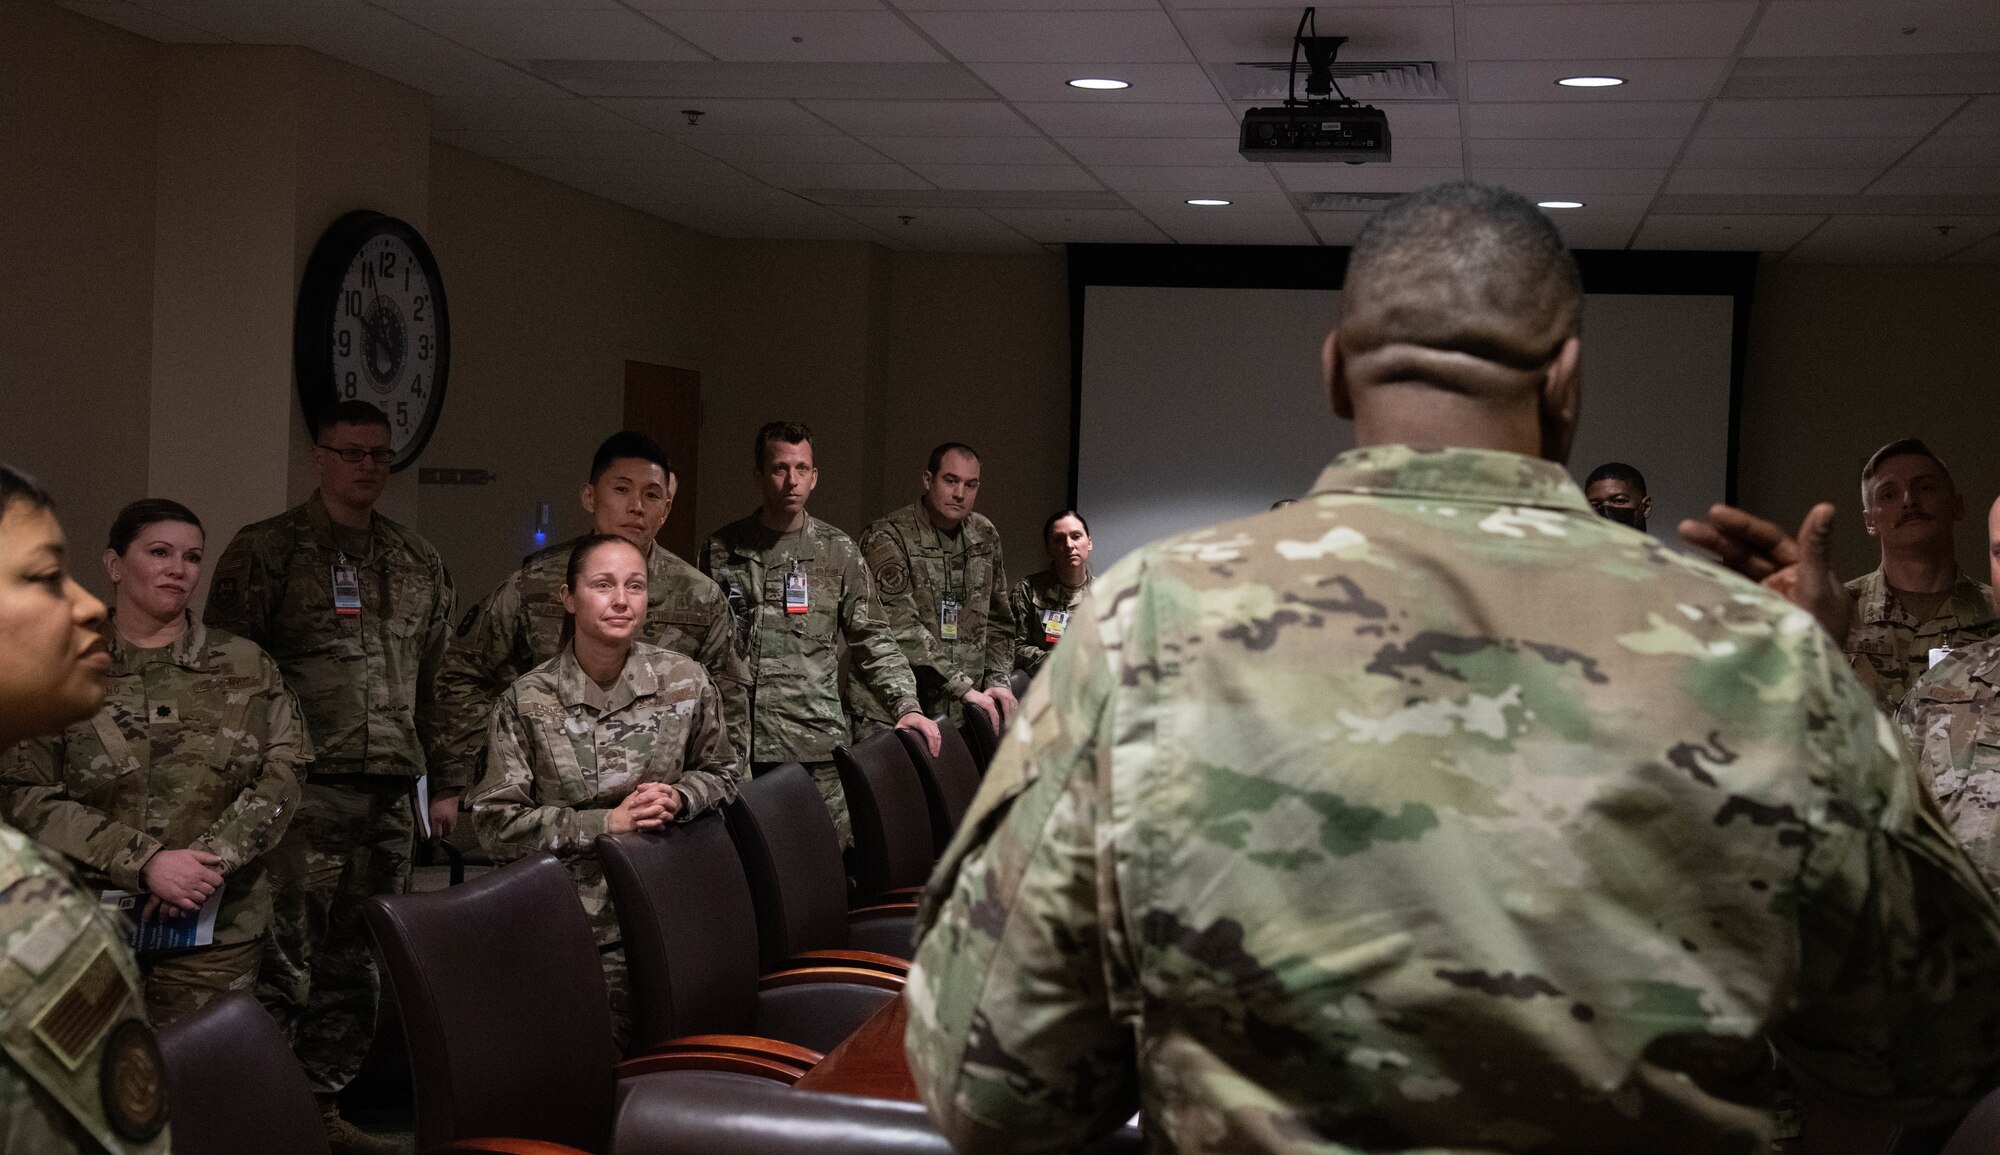 Airman speaks to group